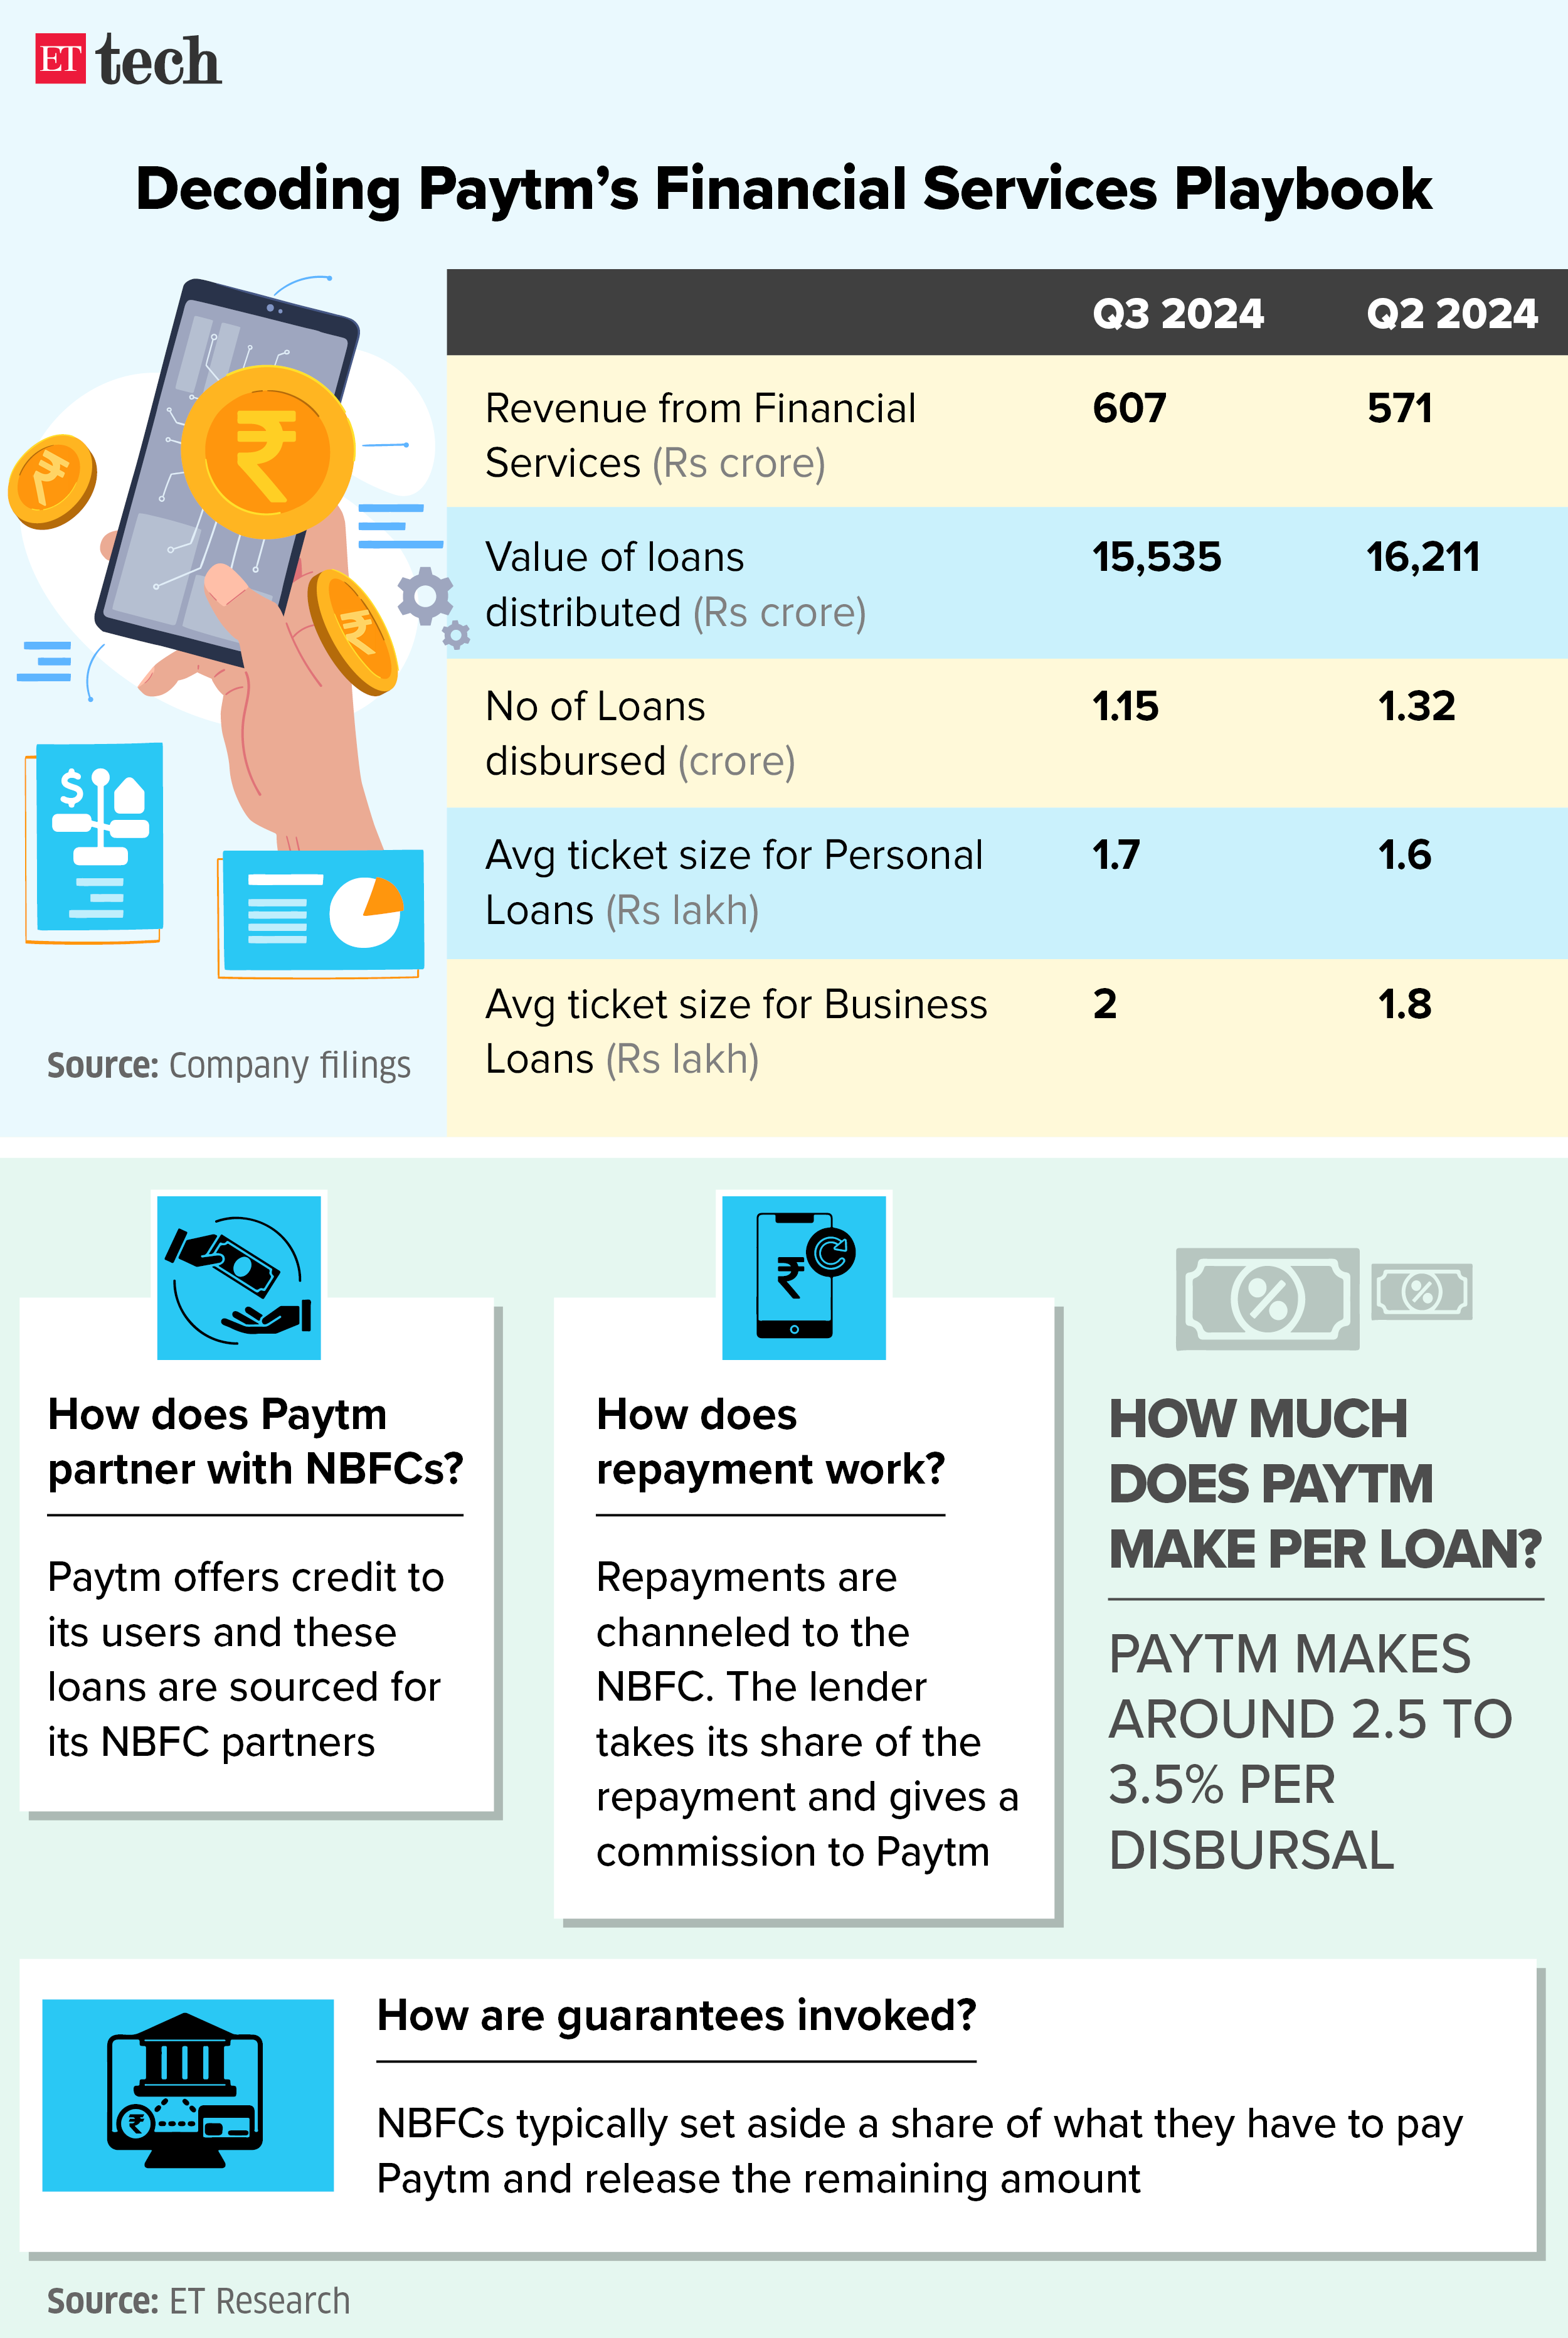 Decoding Paytm Financial Services Playbook_May 2024_Graphic_ETTECH